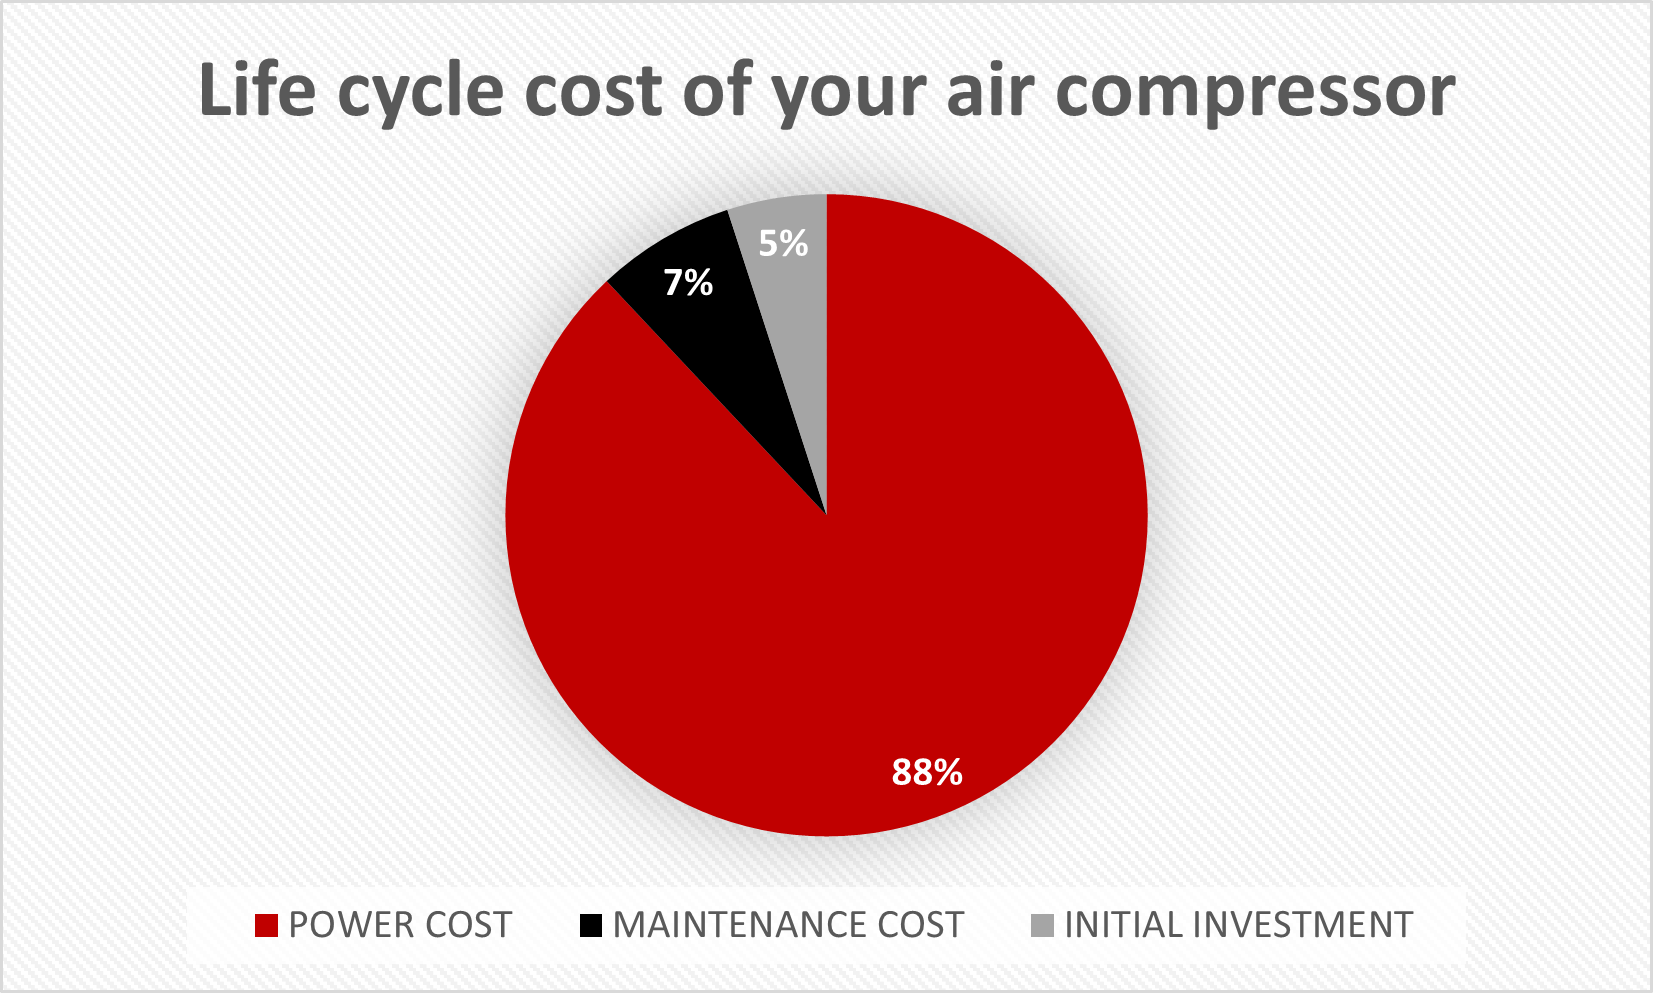 Life Cycle Cost = Power Cost+ Maintenance Cost + Initial Investment